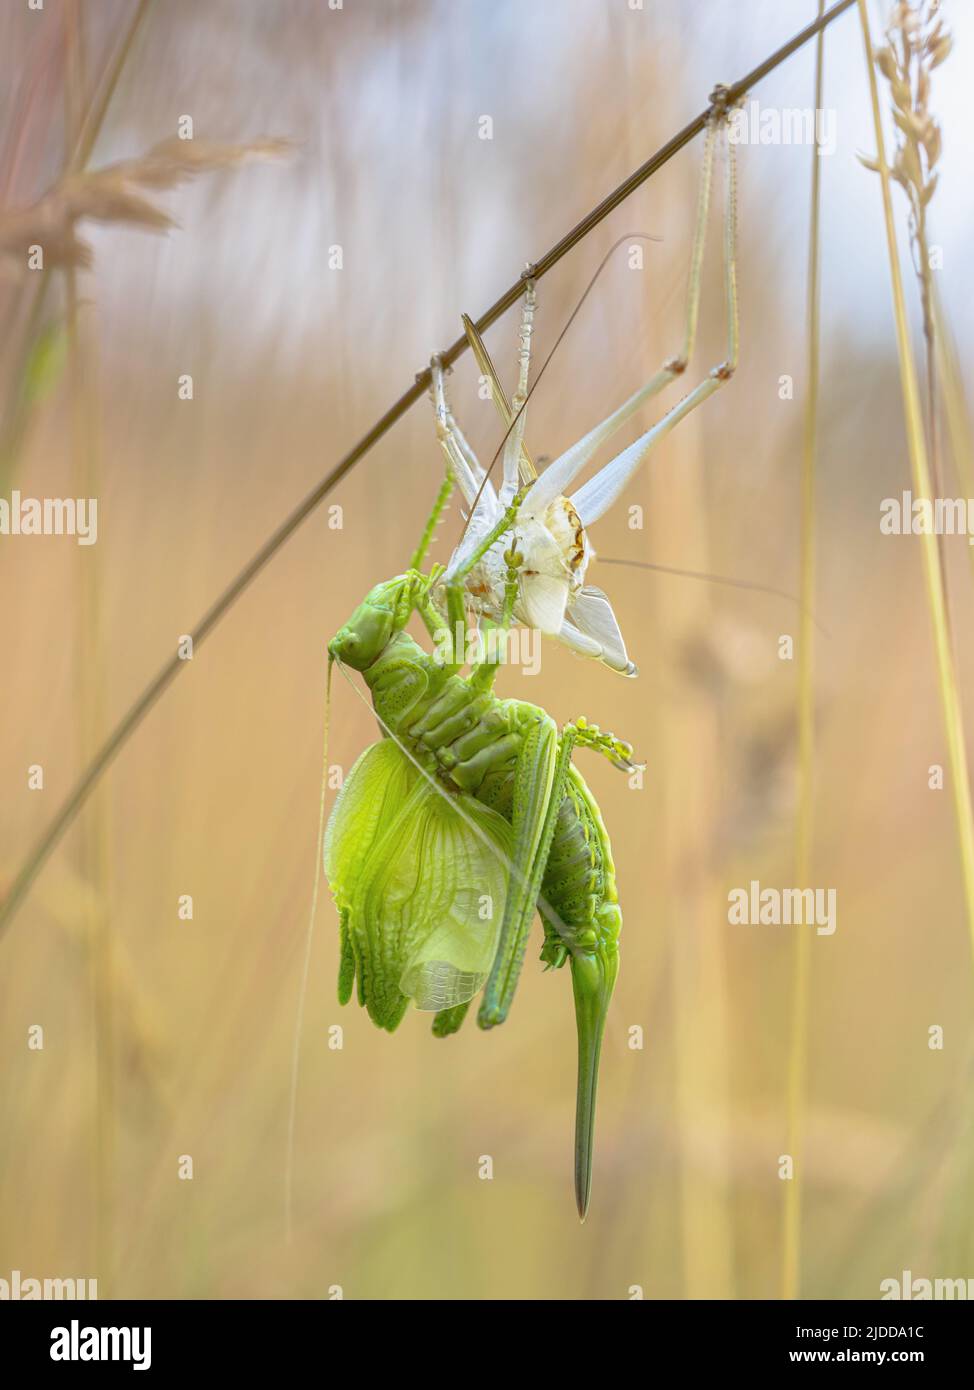 Great green bush-cricket (Tettigonia viridissima) Molting for body Growth. Exoskeleton or shed skin and grasshopper in grass. Stock Photo